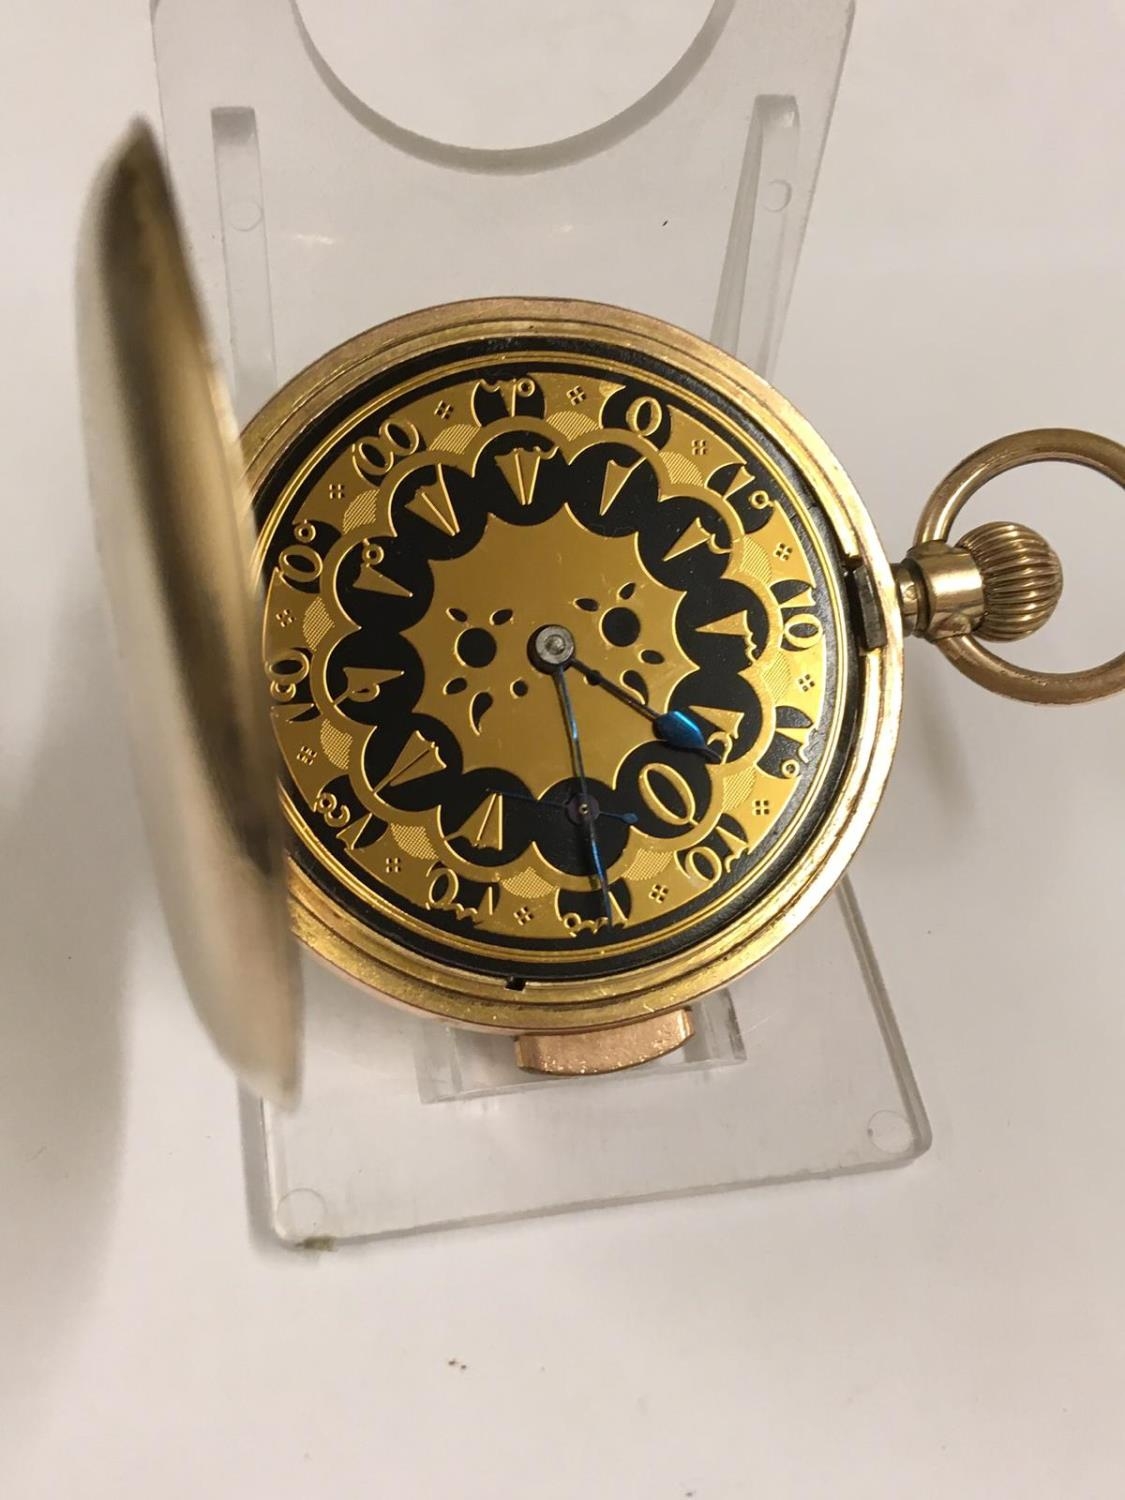 Vintage gold filled ottoman quarter repeater pocket watch ticking and repeat function working . Sold